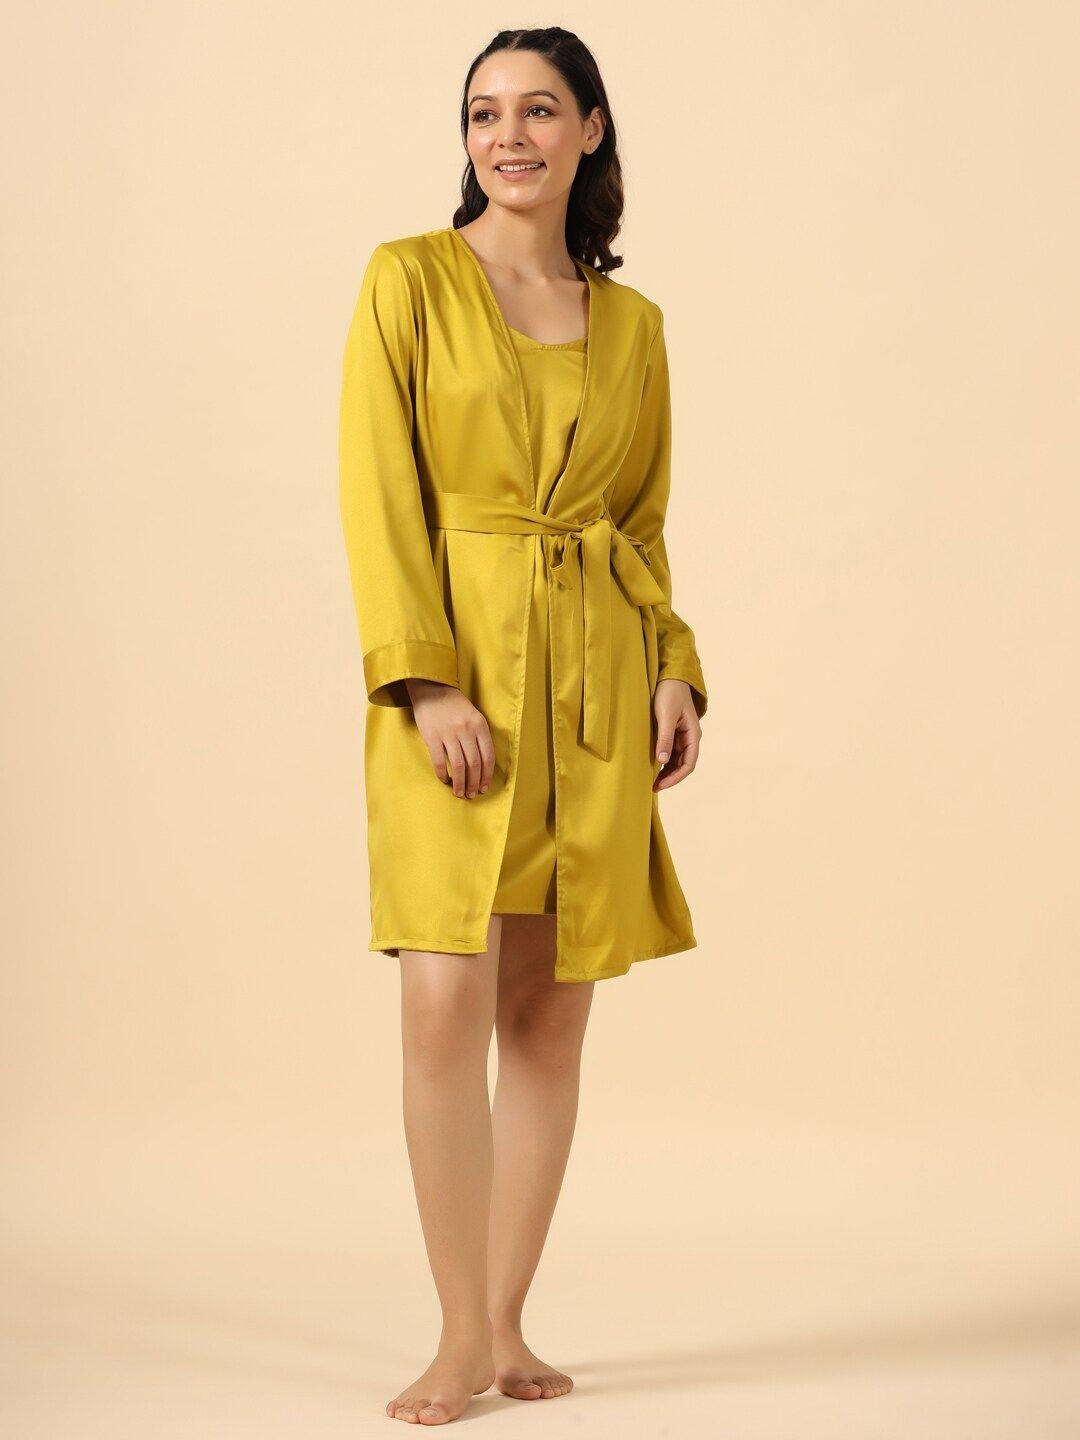 etc-mustard-yellow-shoulder-straps-satin-wrap-nightdress-comes-with-robe